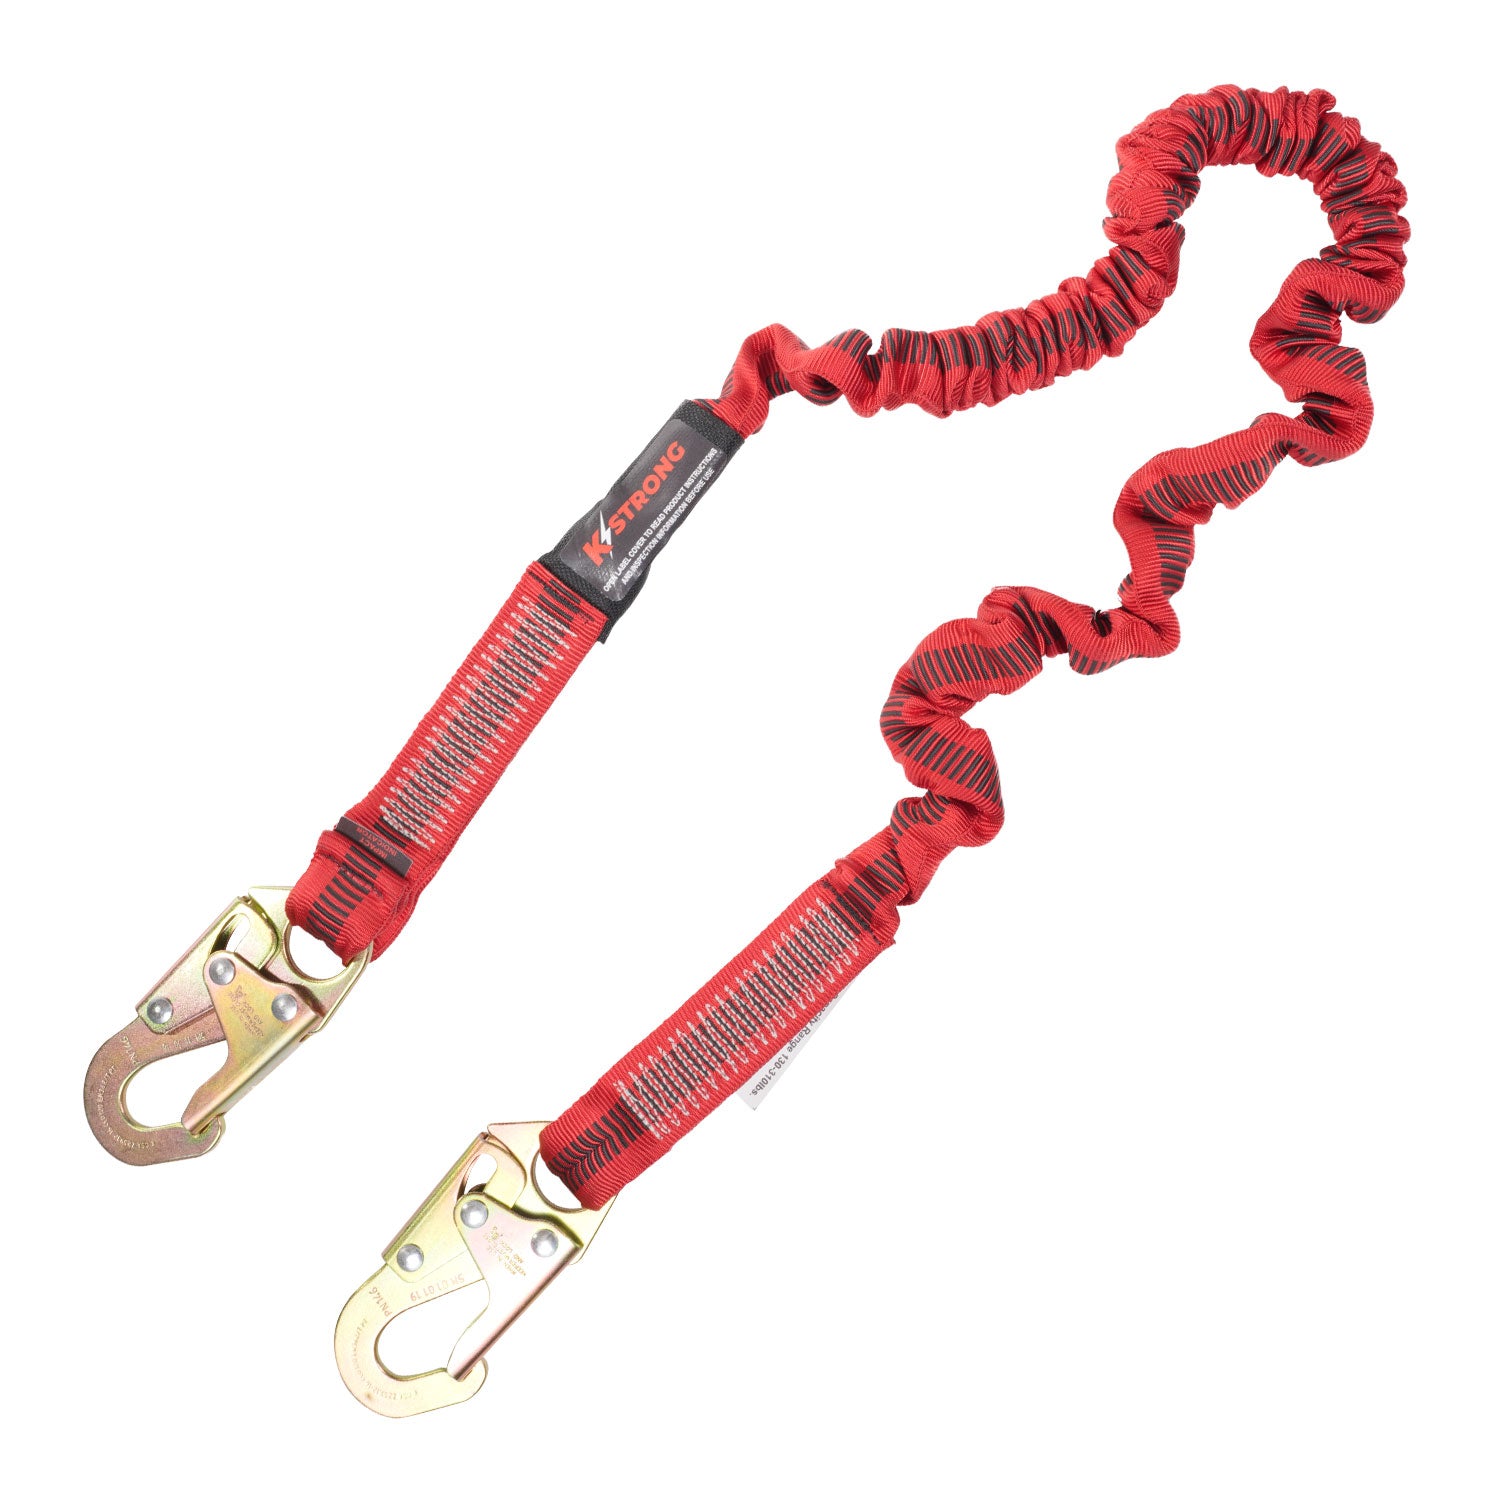 KStrong 6 ft. Elasticated design shock absorbing lanyard with snap hooks (each)